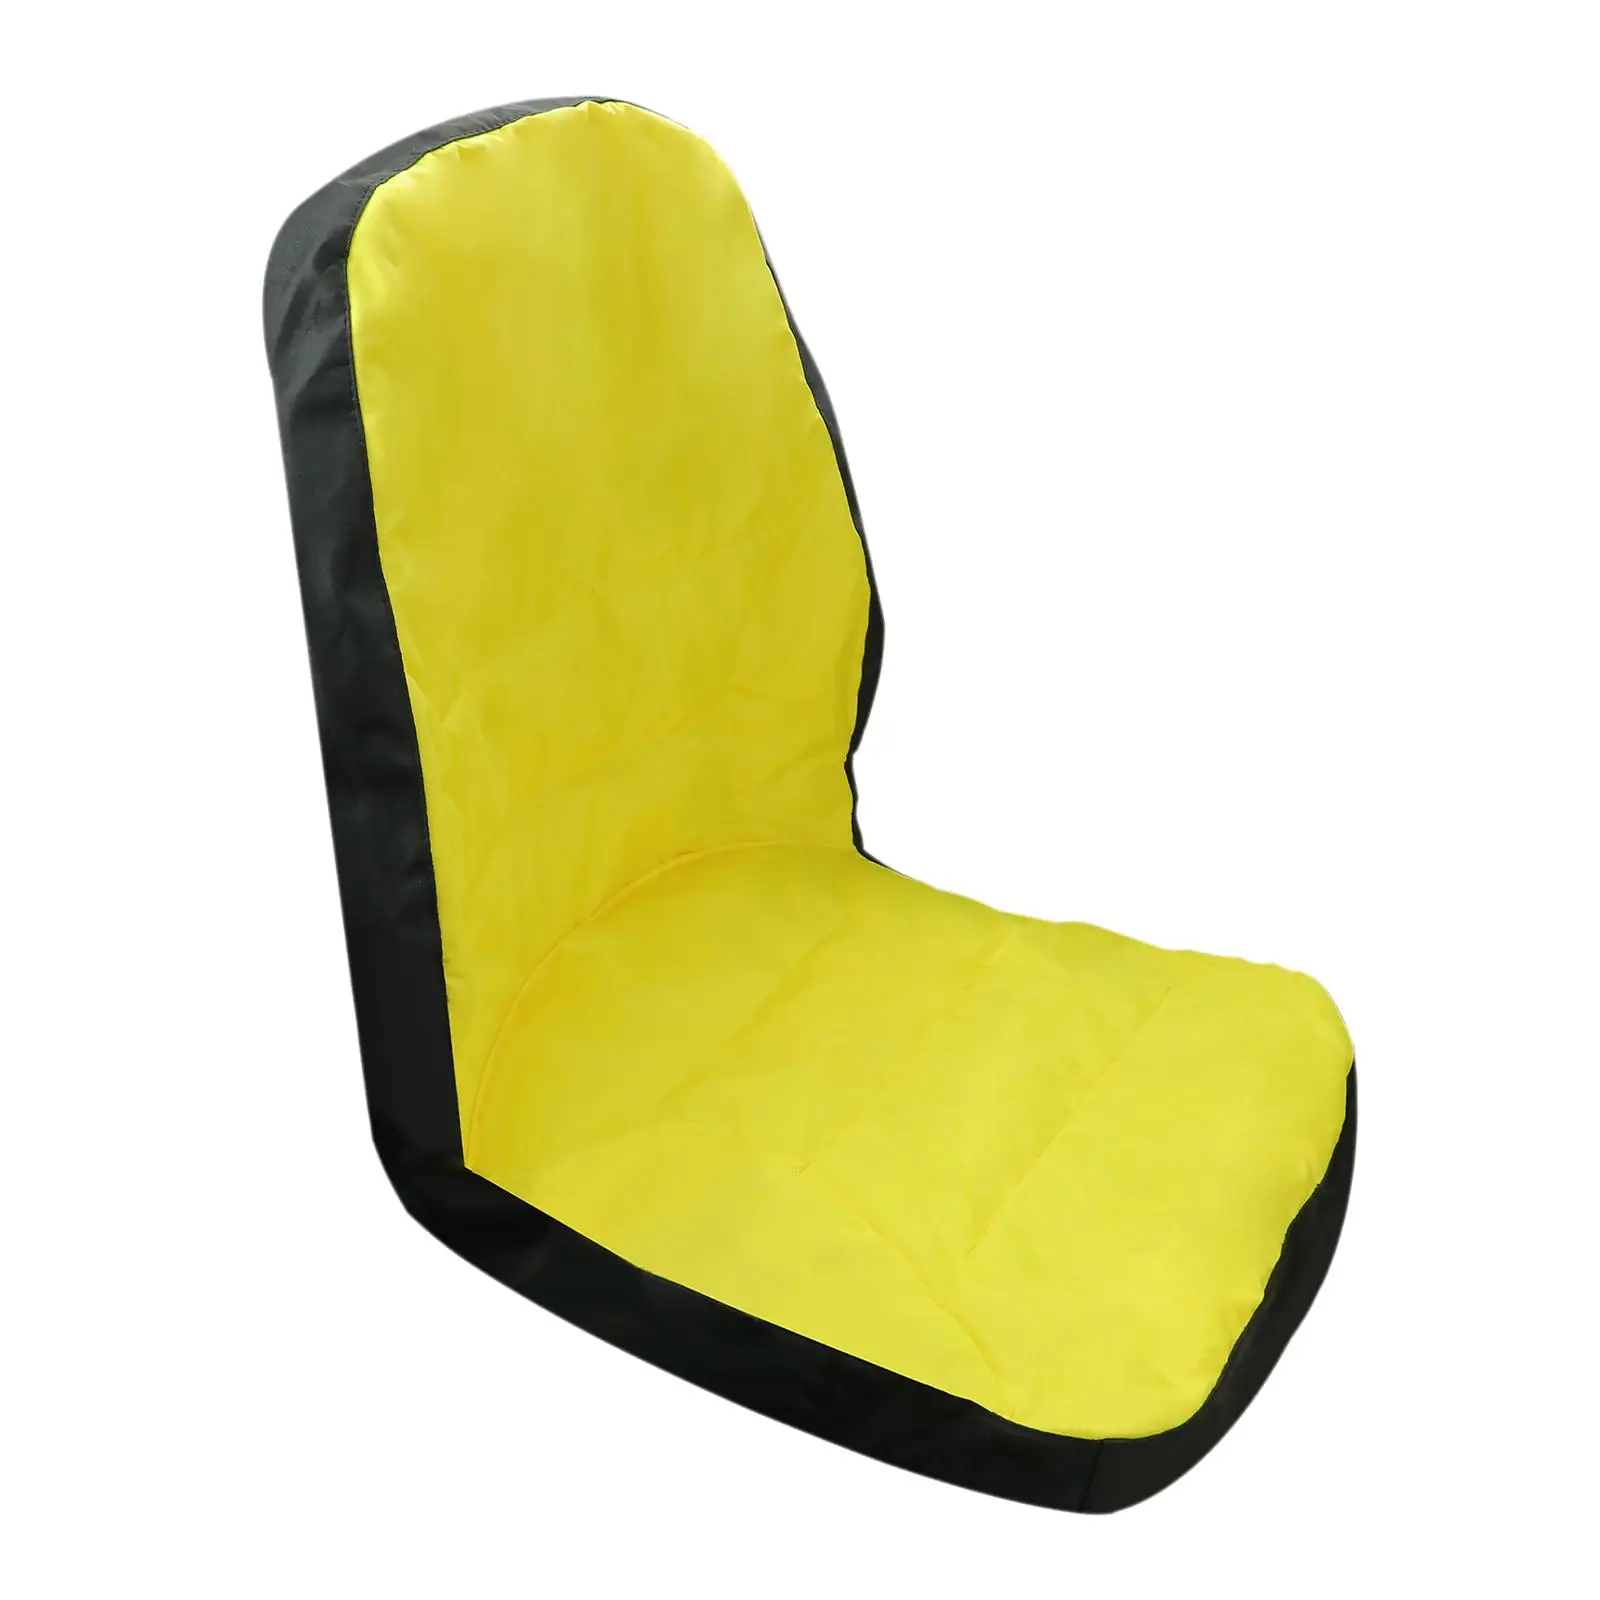 Compact Utility Tractor Seat Cover LP95233 Waterproof Comfortable 18inch Cushioned Seat for 1023E 3R Series 2305 2720 2520